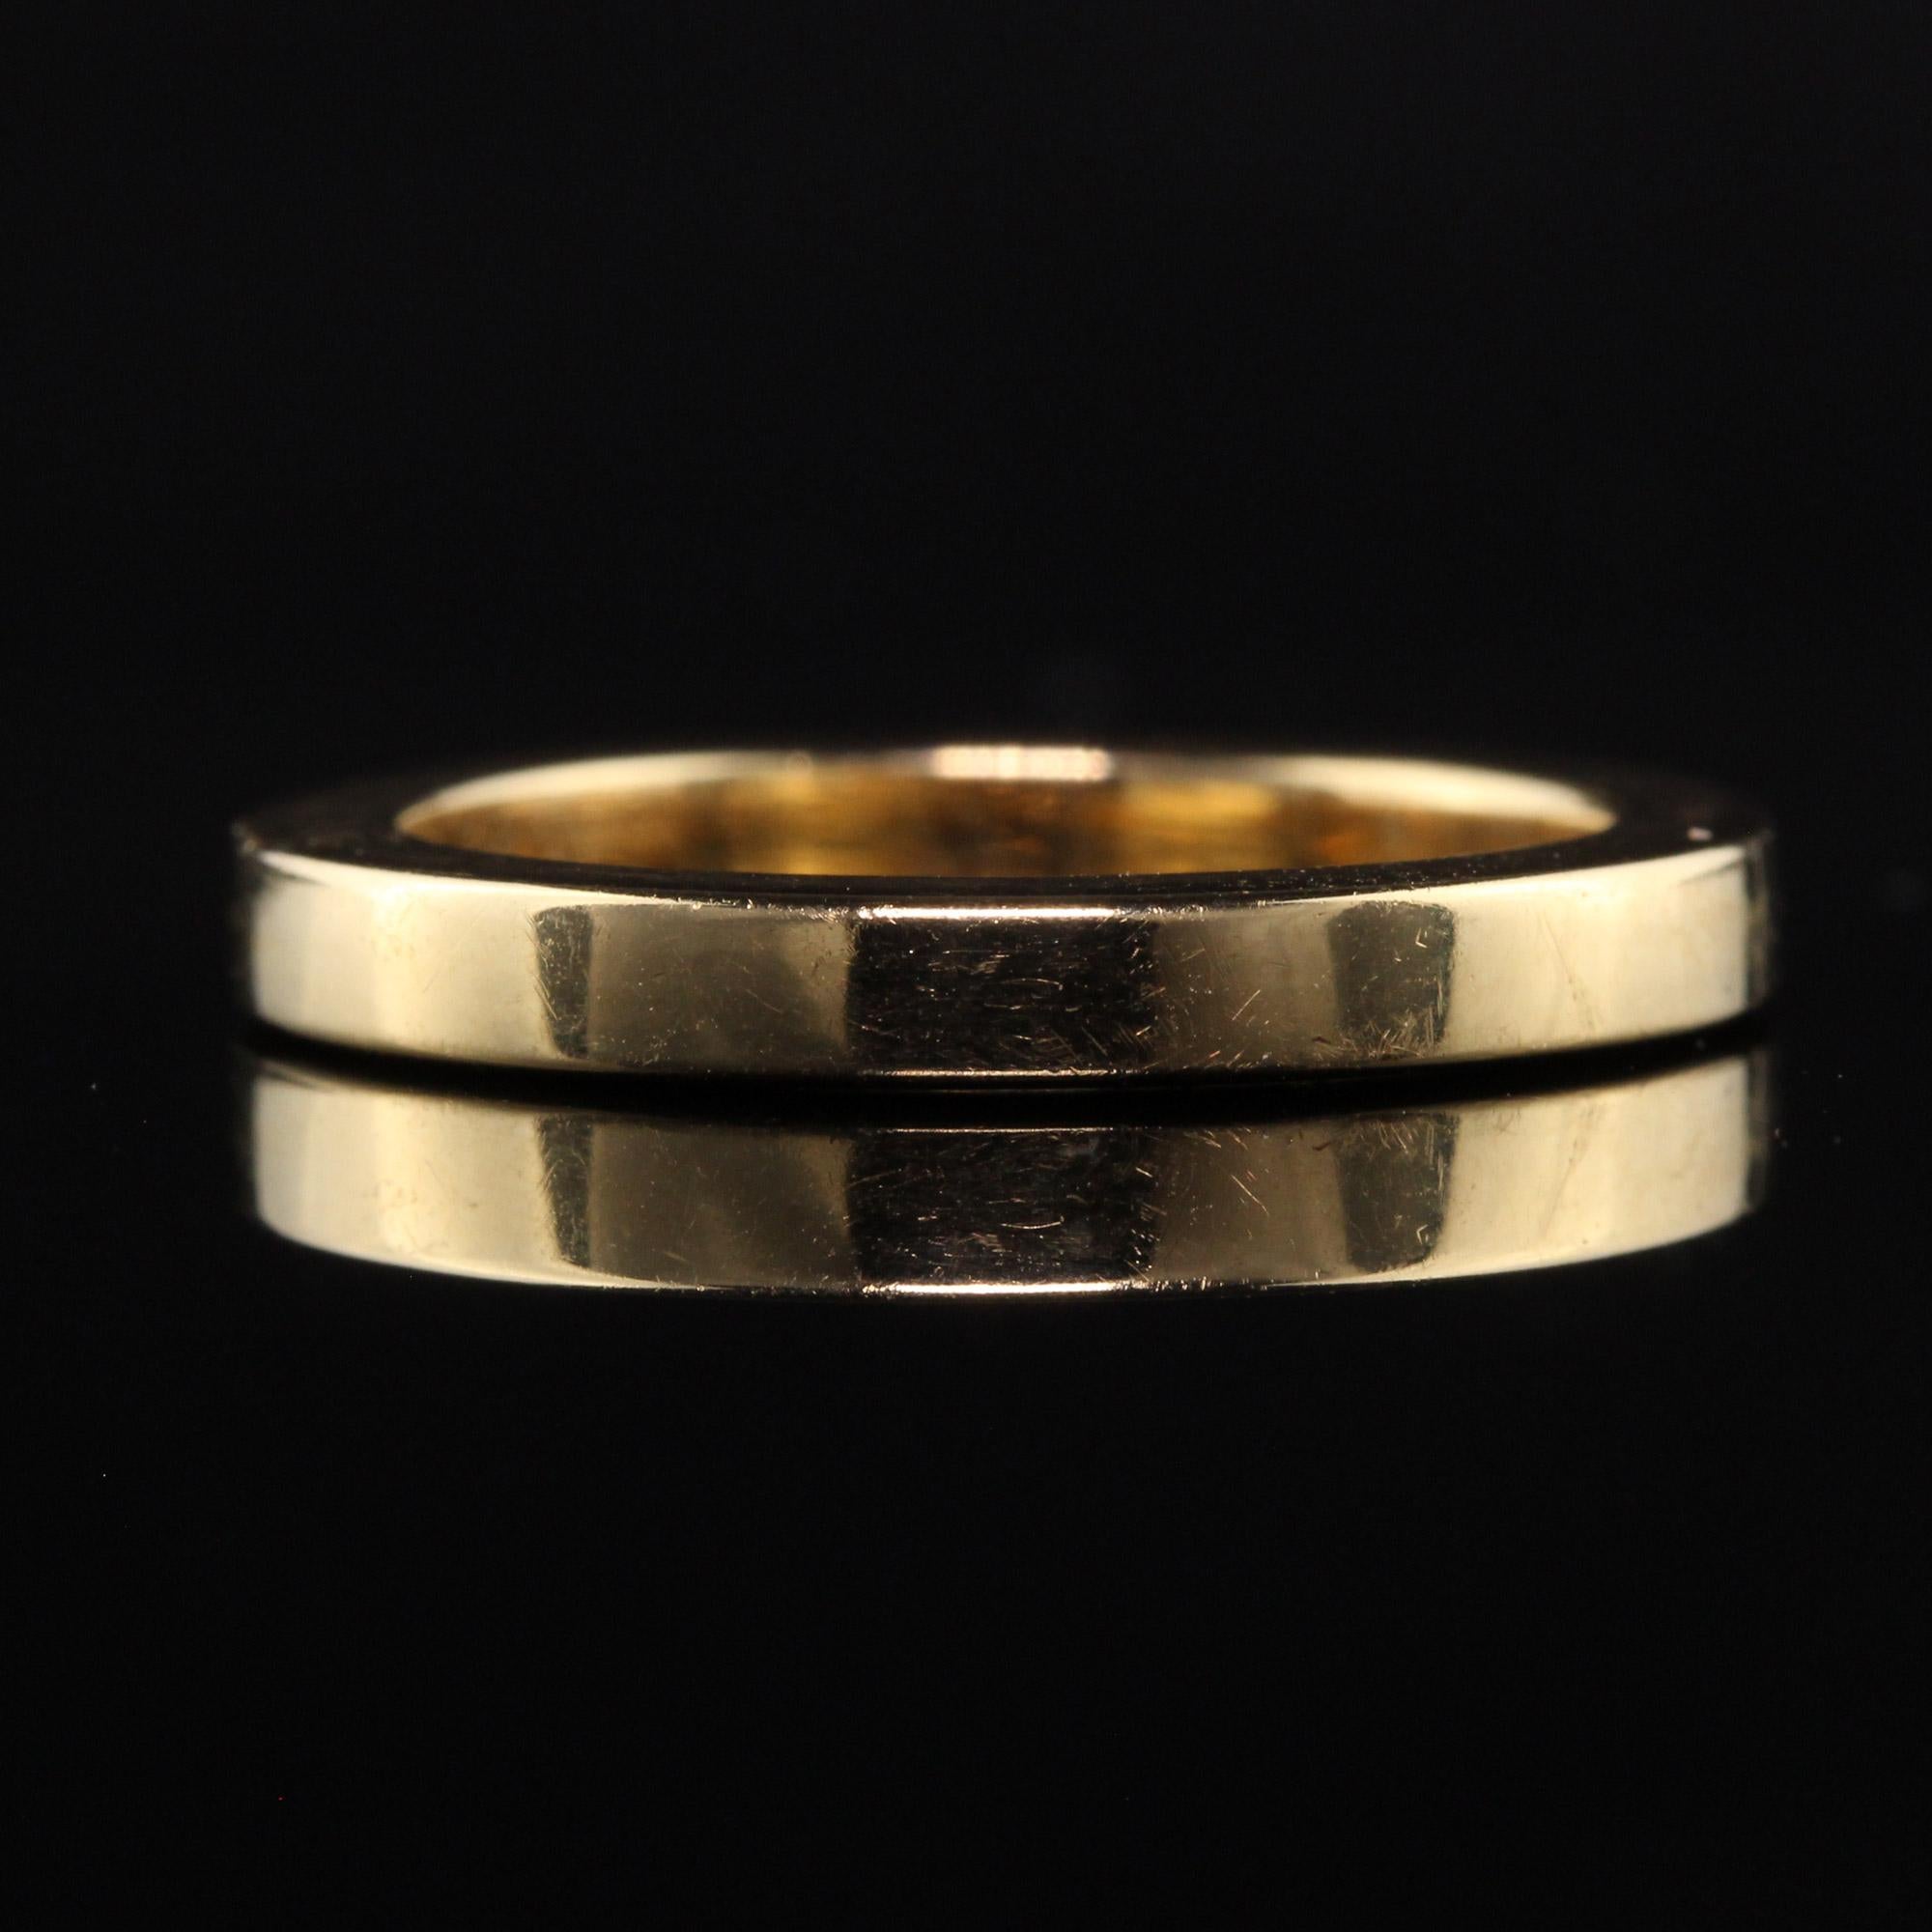 Vintage Estate Retro 18K Yellow Gold Classic Wedding Band In Good Condition For Sale In Great Neck, NY